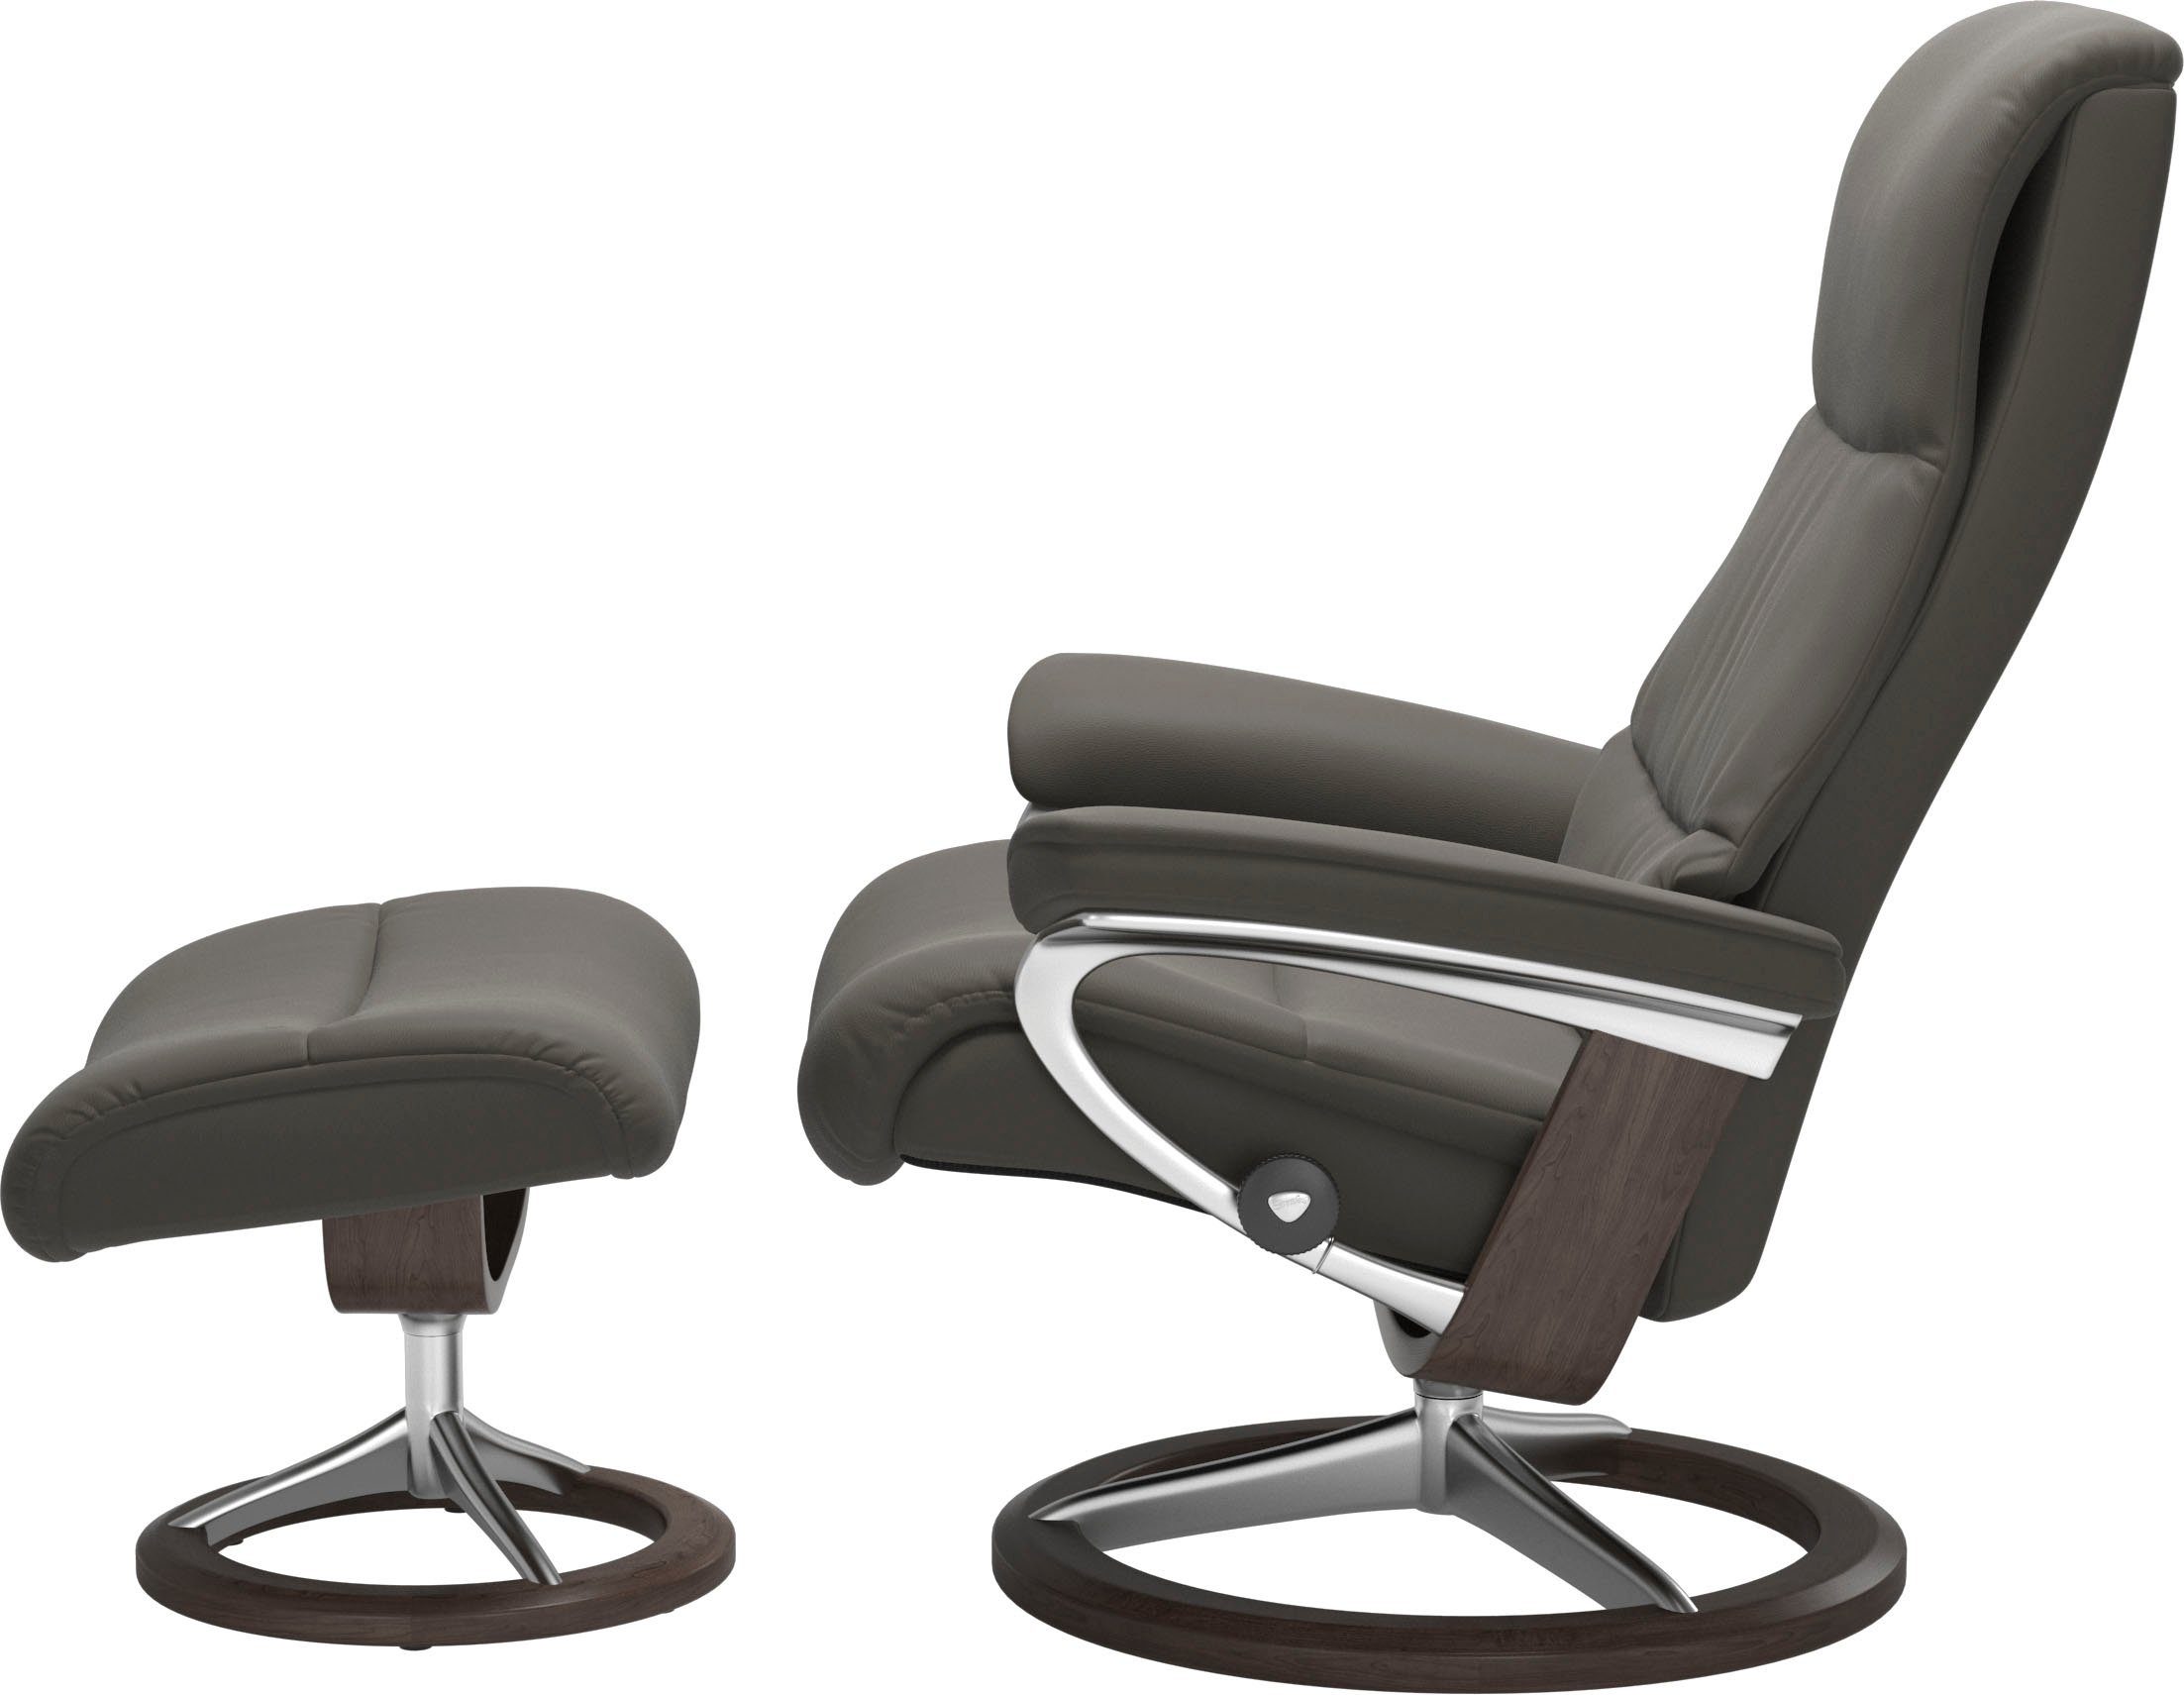 Relaxsessel Wenge mit Signature View, Base, Stressless® L,Gestell Größe